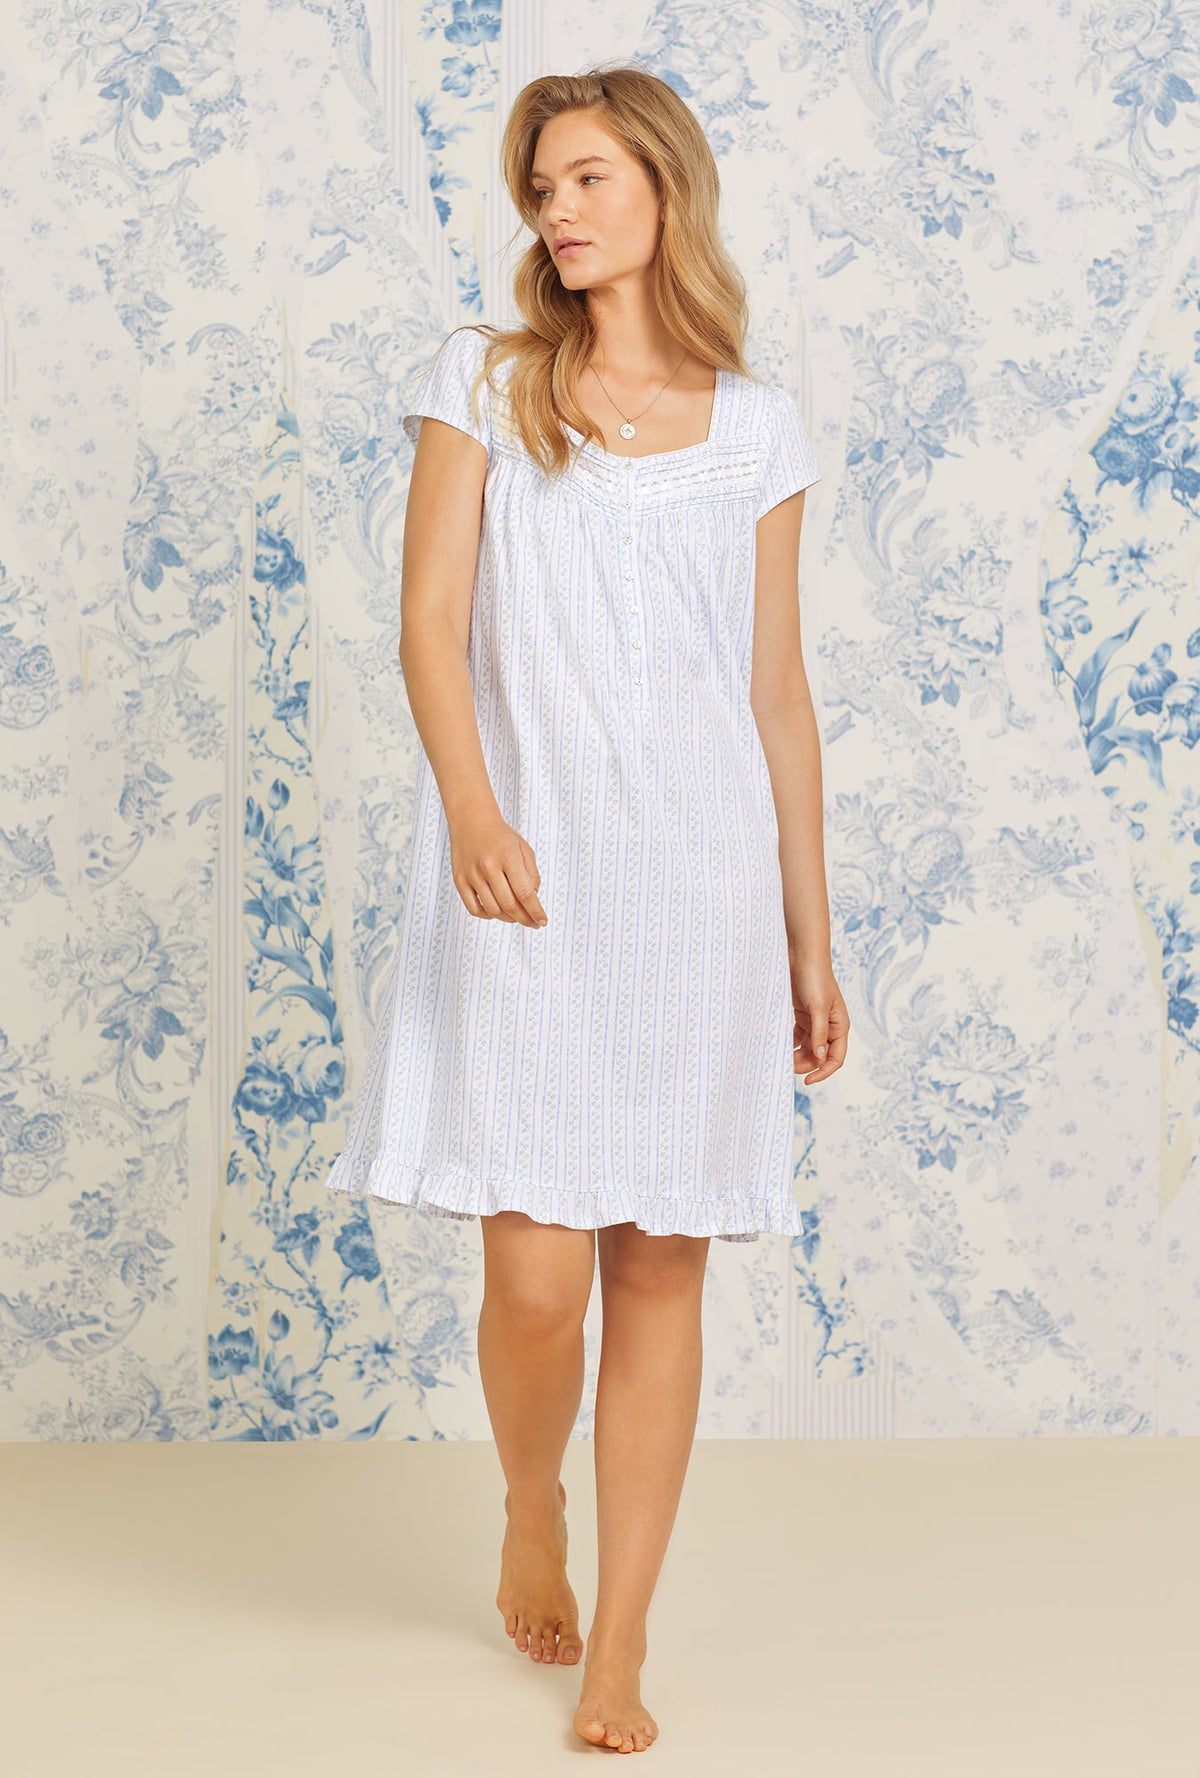 A lady wearing Forget Me Not Stripe Short Cotton Knit Nightgown